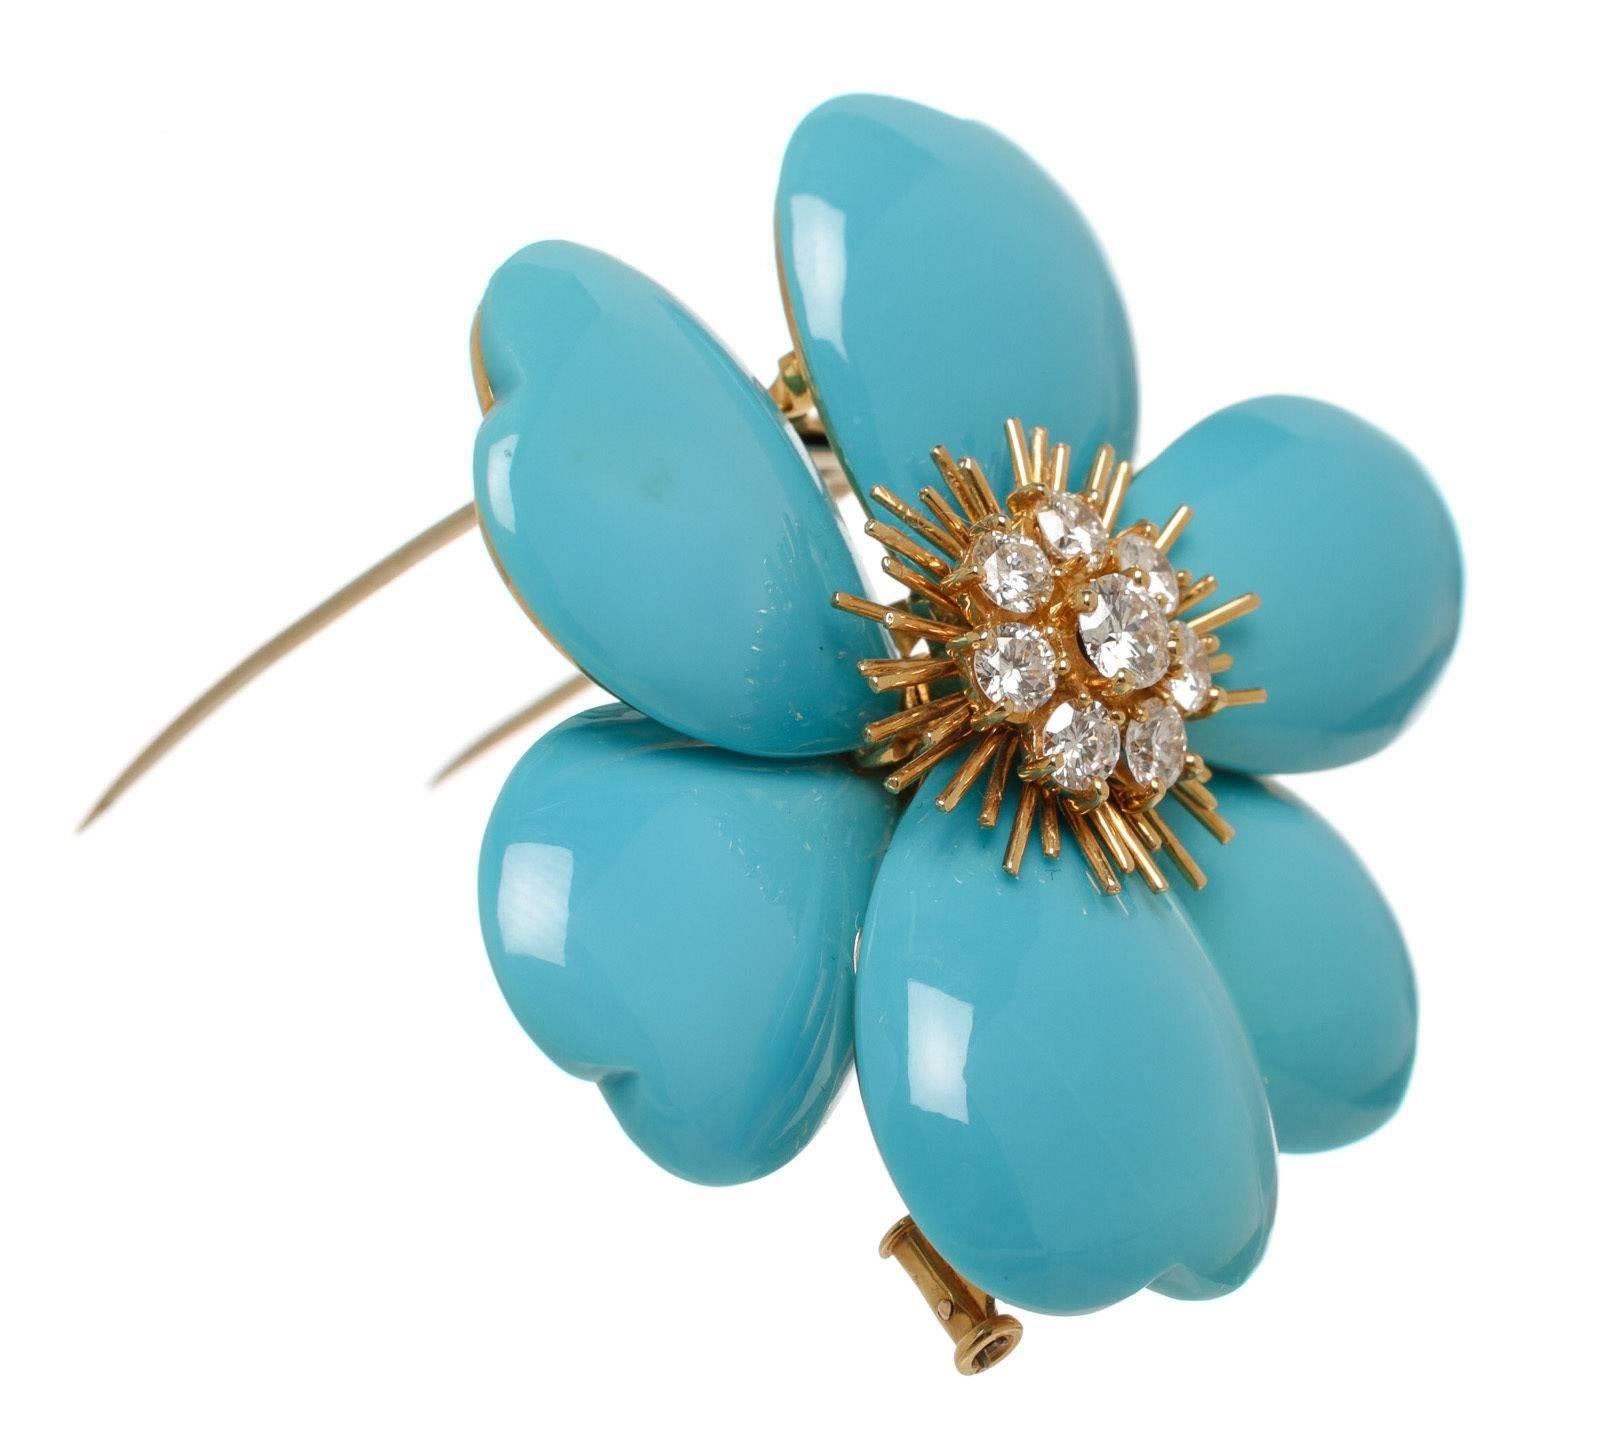 Designer: Van Cleef & Arpels
Type:
Brooch
Condition: Excellent condition
Color:
Turquoise and Yellow Gold
Material:
Turquoise, Yellow Gold, and 7 Diamonds
Dimensions:
53mm W x 17mm D
Description:
The comparable large size item on the Van